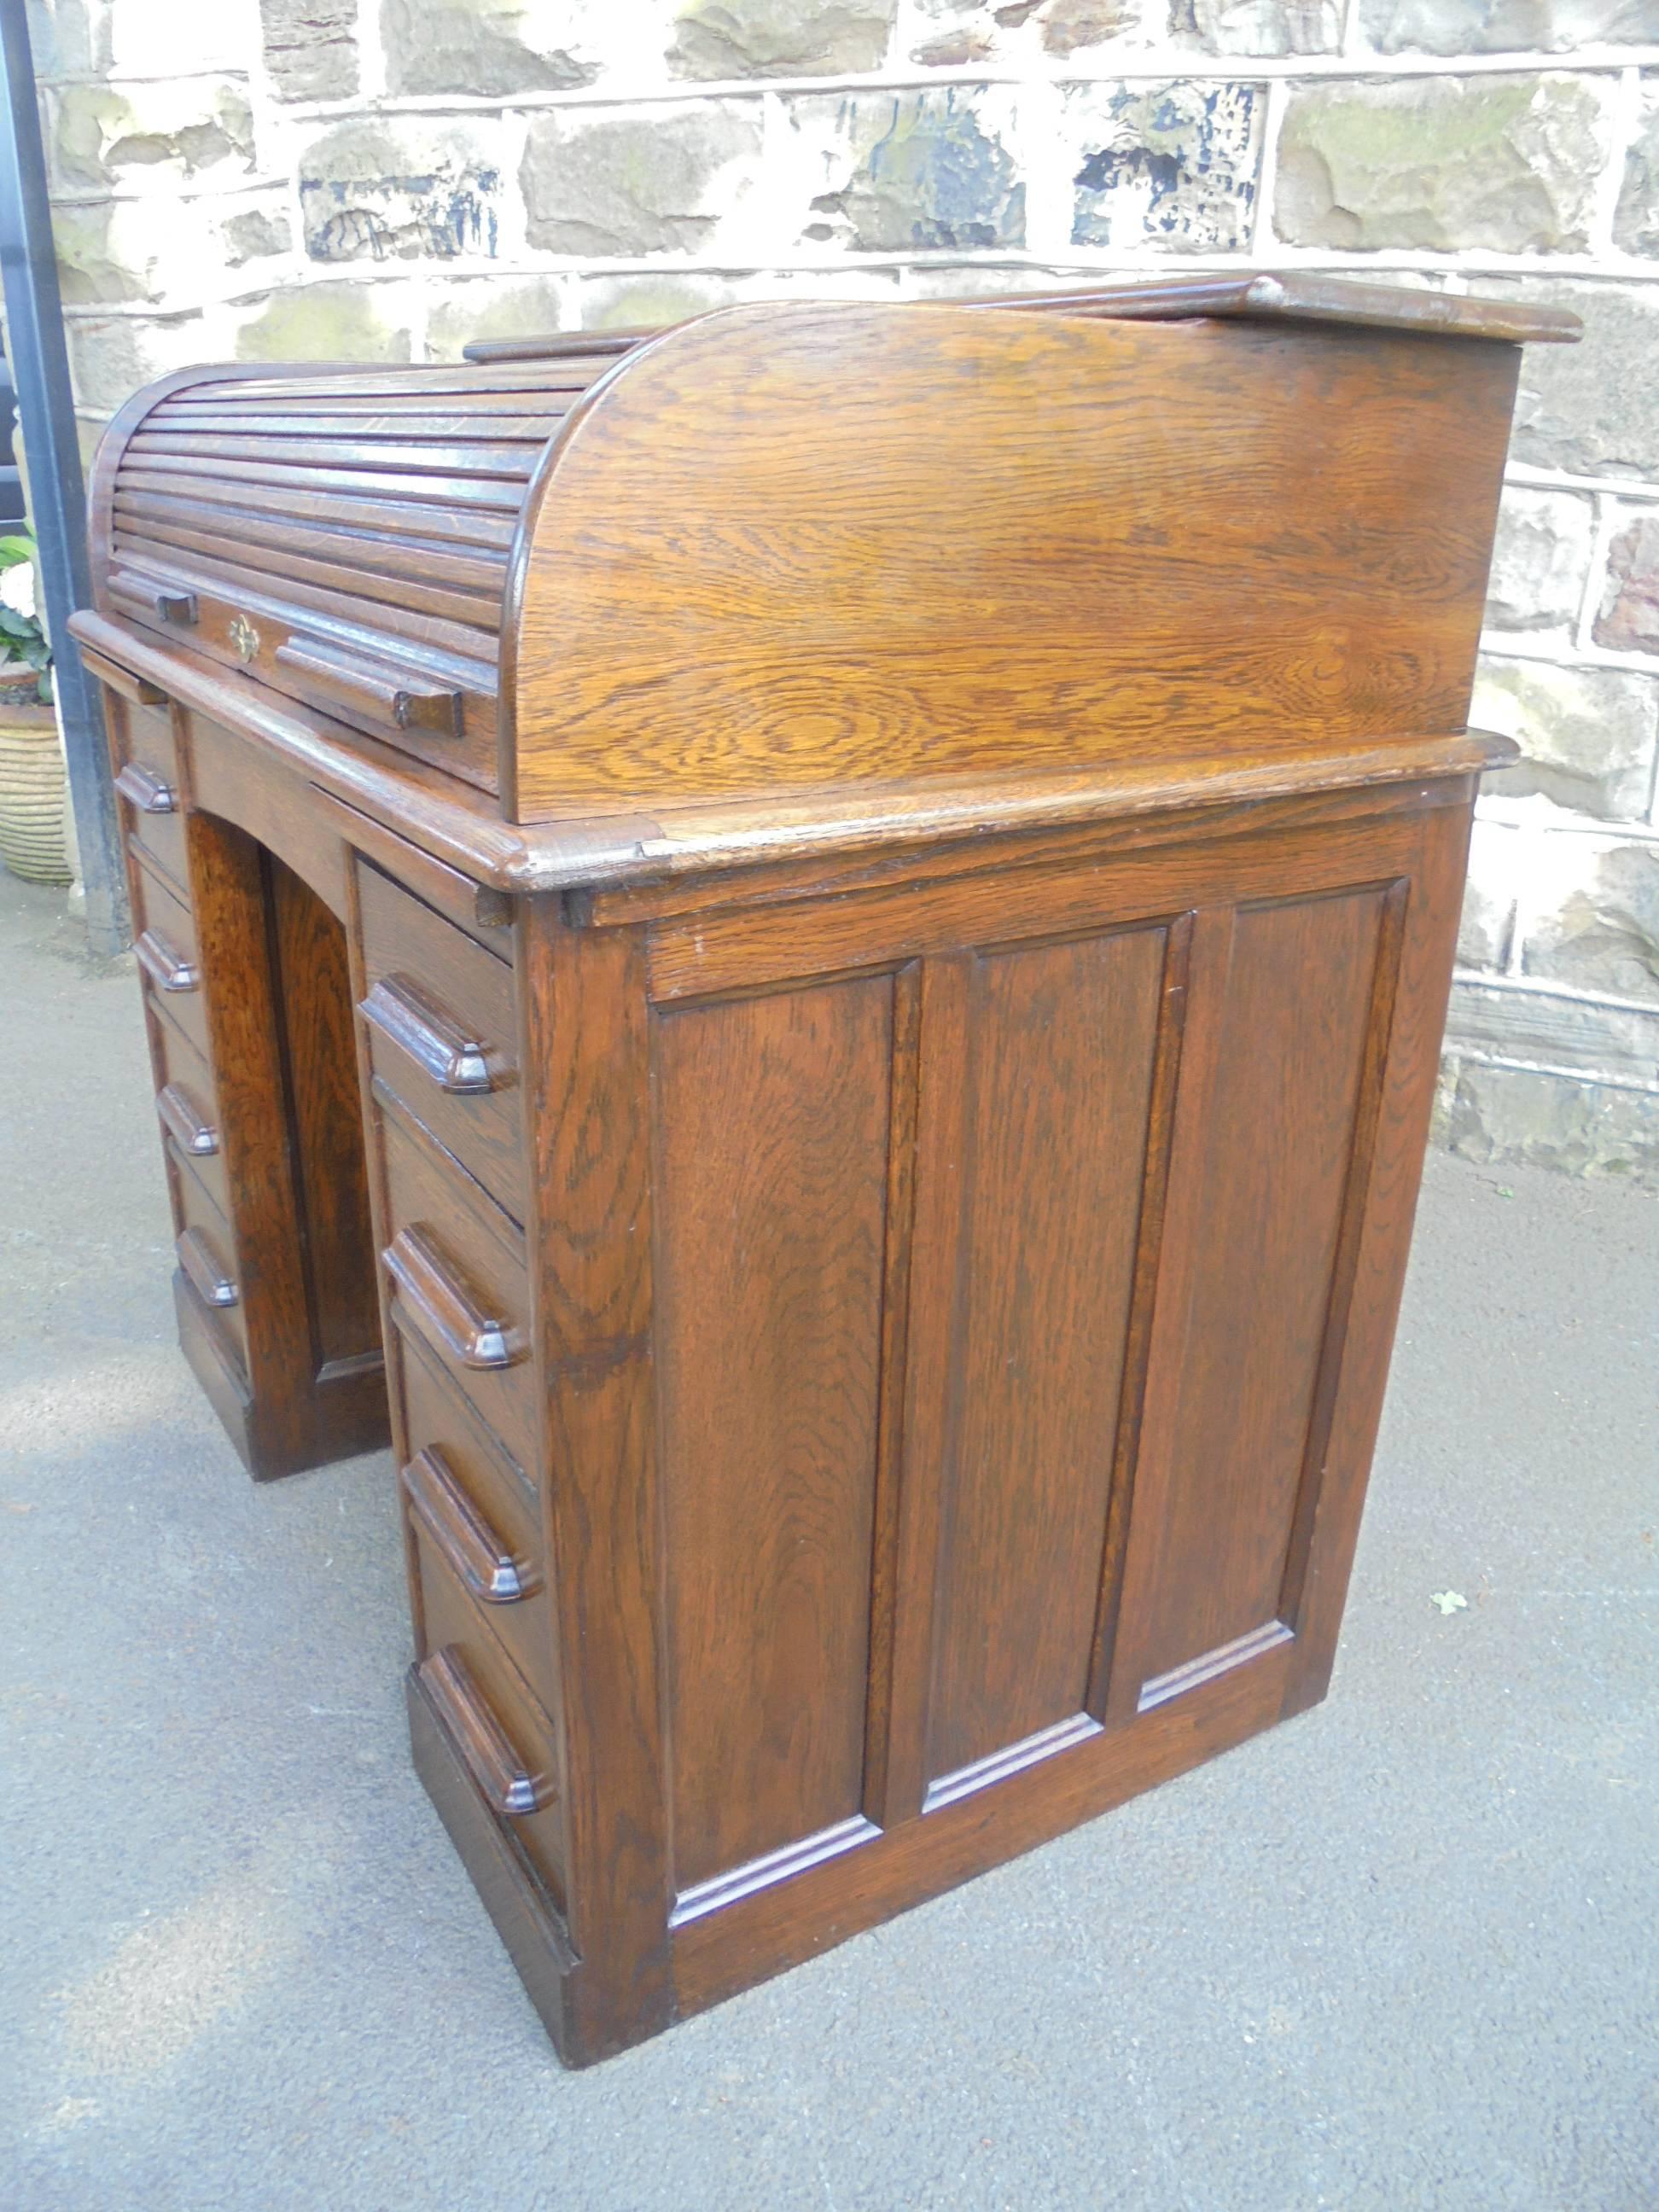 Offered for sale is this Edwardian oak roll top desk. 

Dating from 1900. Made from solid oak. It has a tambour roller top. Inside it has a series of pigeon holes and four draws. It has two pull-out slides perfect for using a mouse on or putting